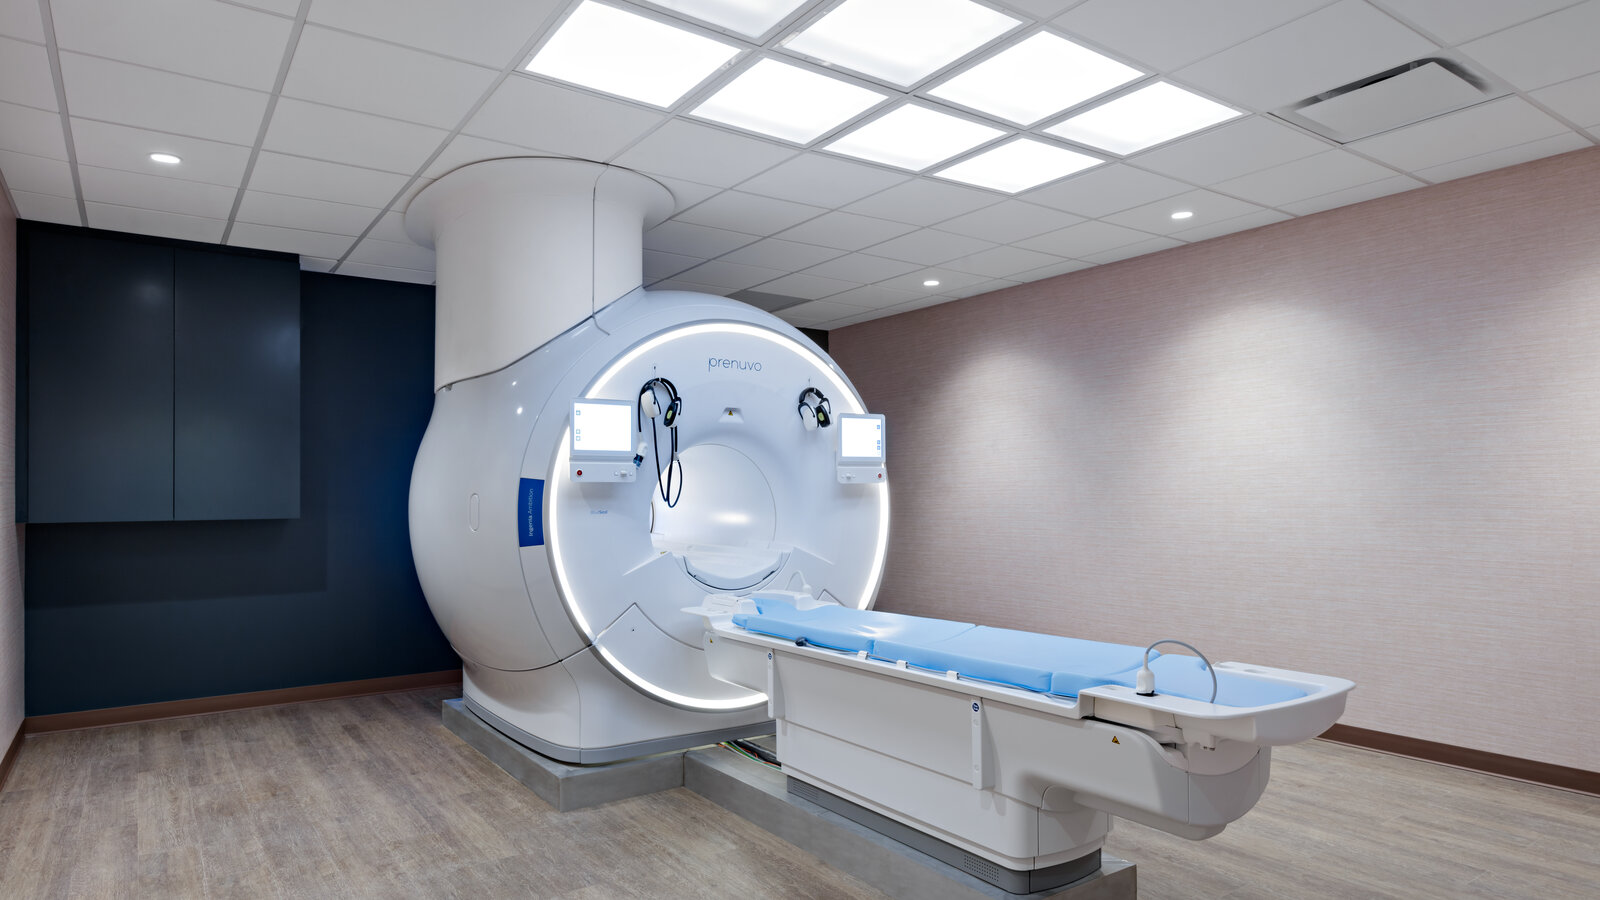 Y Combinator’s Call For 100 Times More MRI Scans